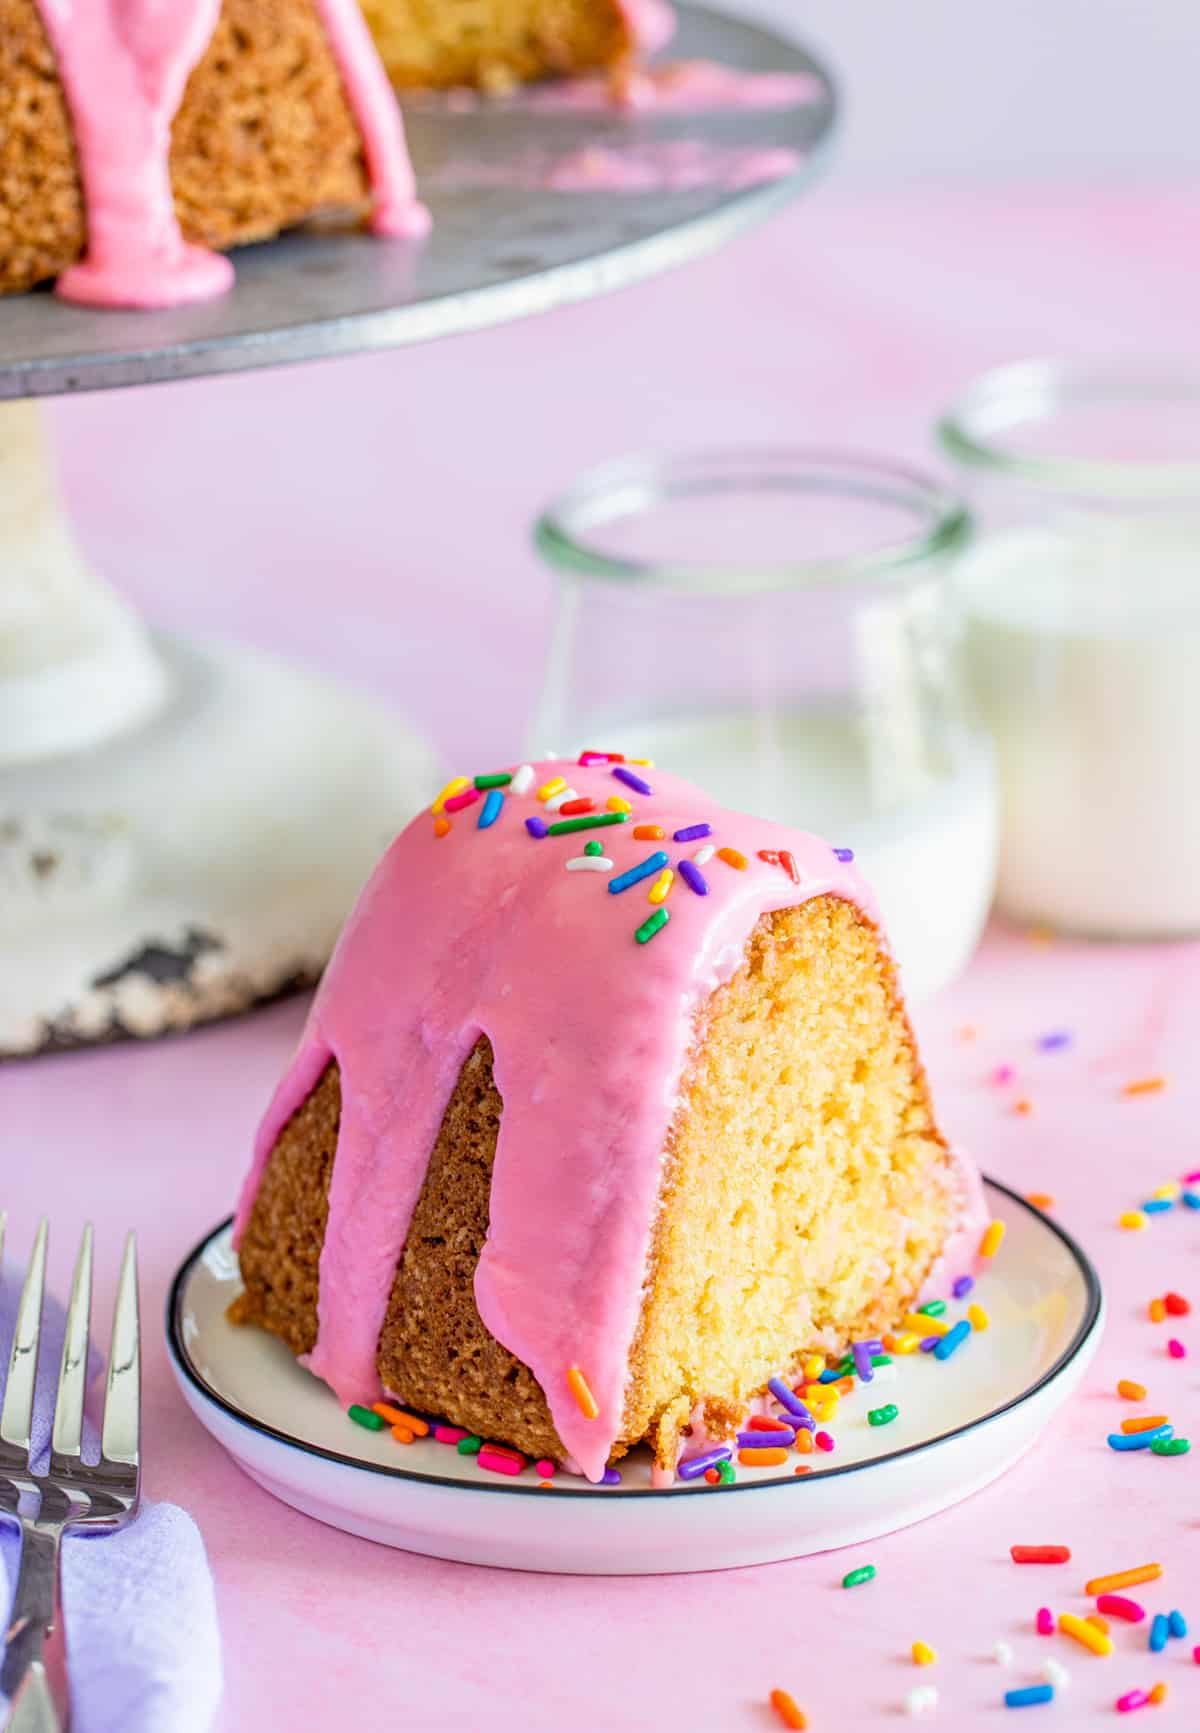 Slice of the Donut Cake on white plate with milk in backgound.